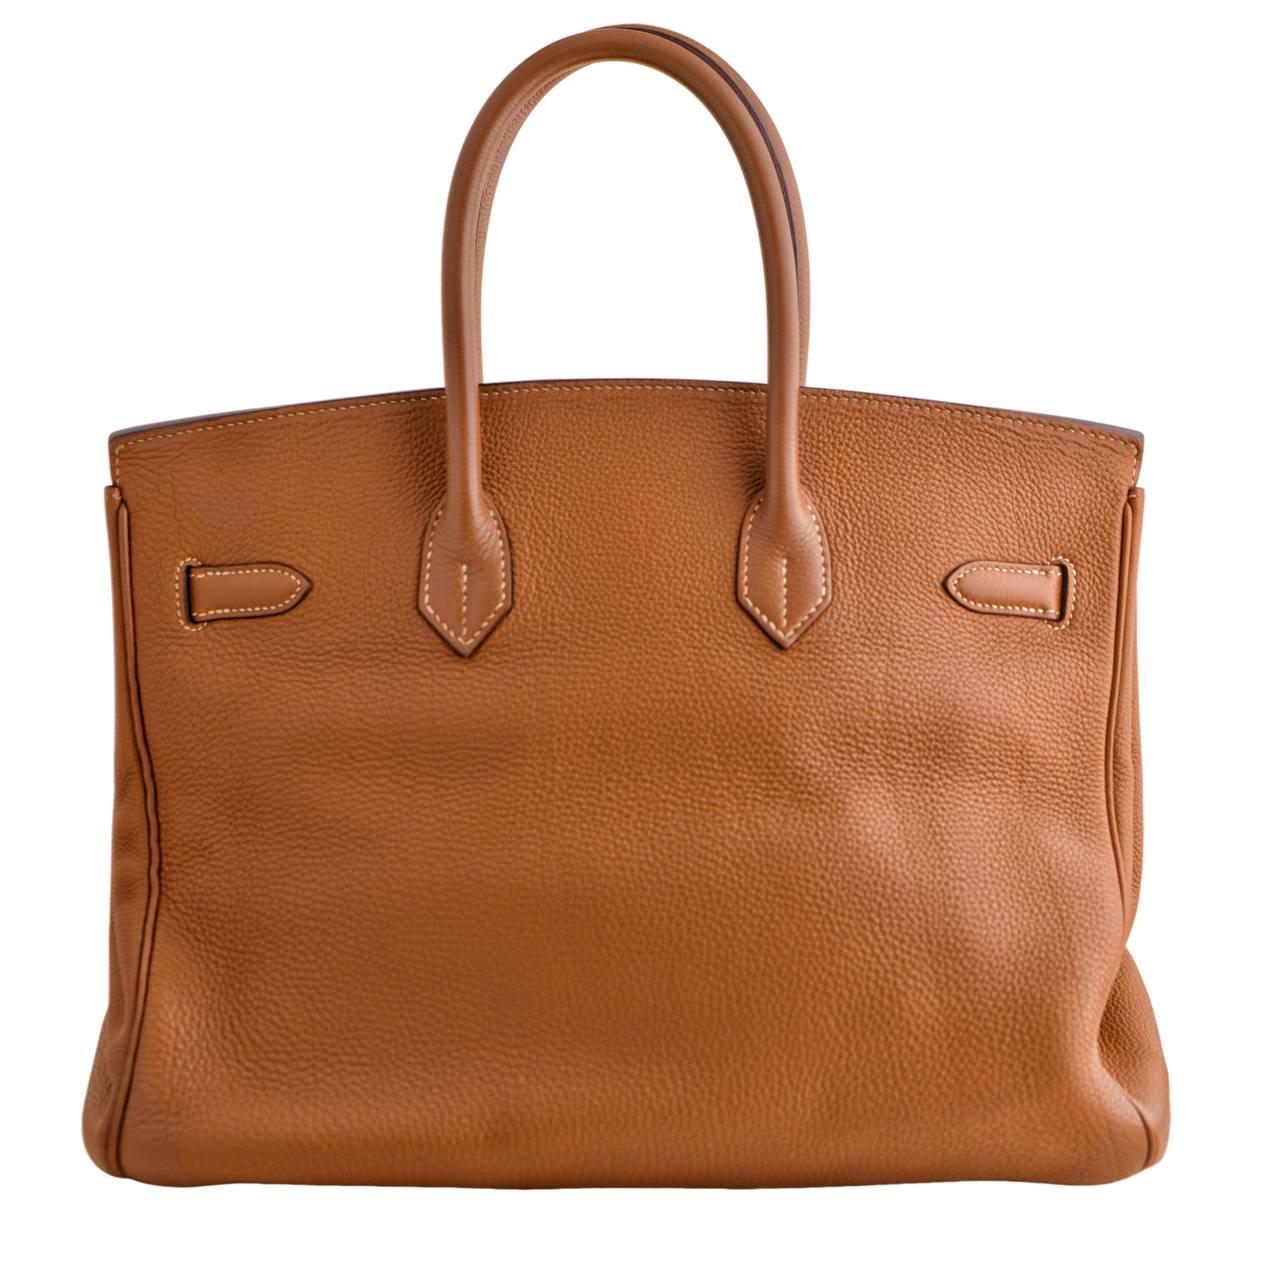 Hermès Gold Clémence Birkin 35 Togo Silver Hardware In Excellent Condition For Sale In Banbury, GB